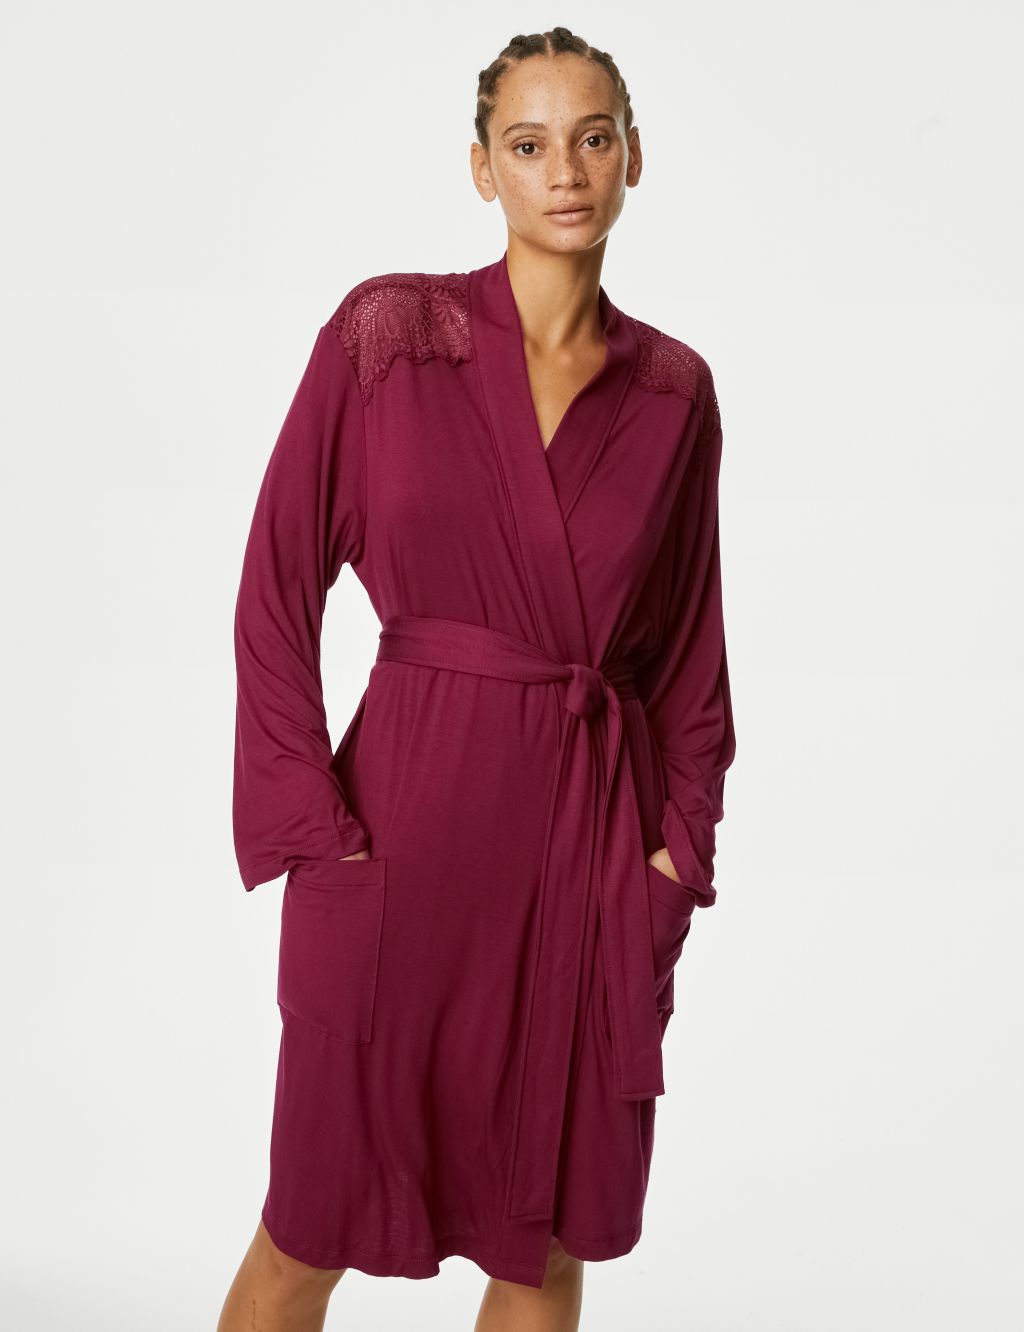 Body Soft™ Lace Detail Short Dressing Gown image 4